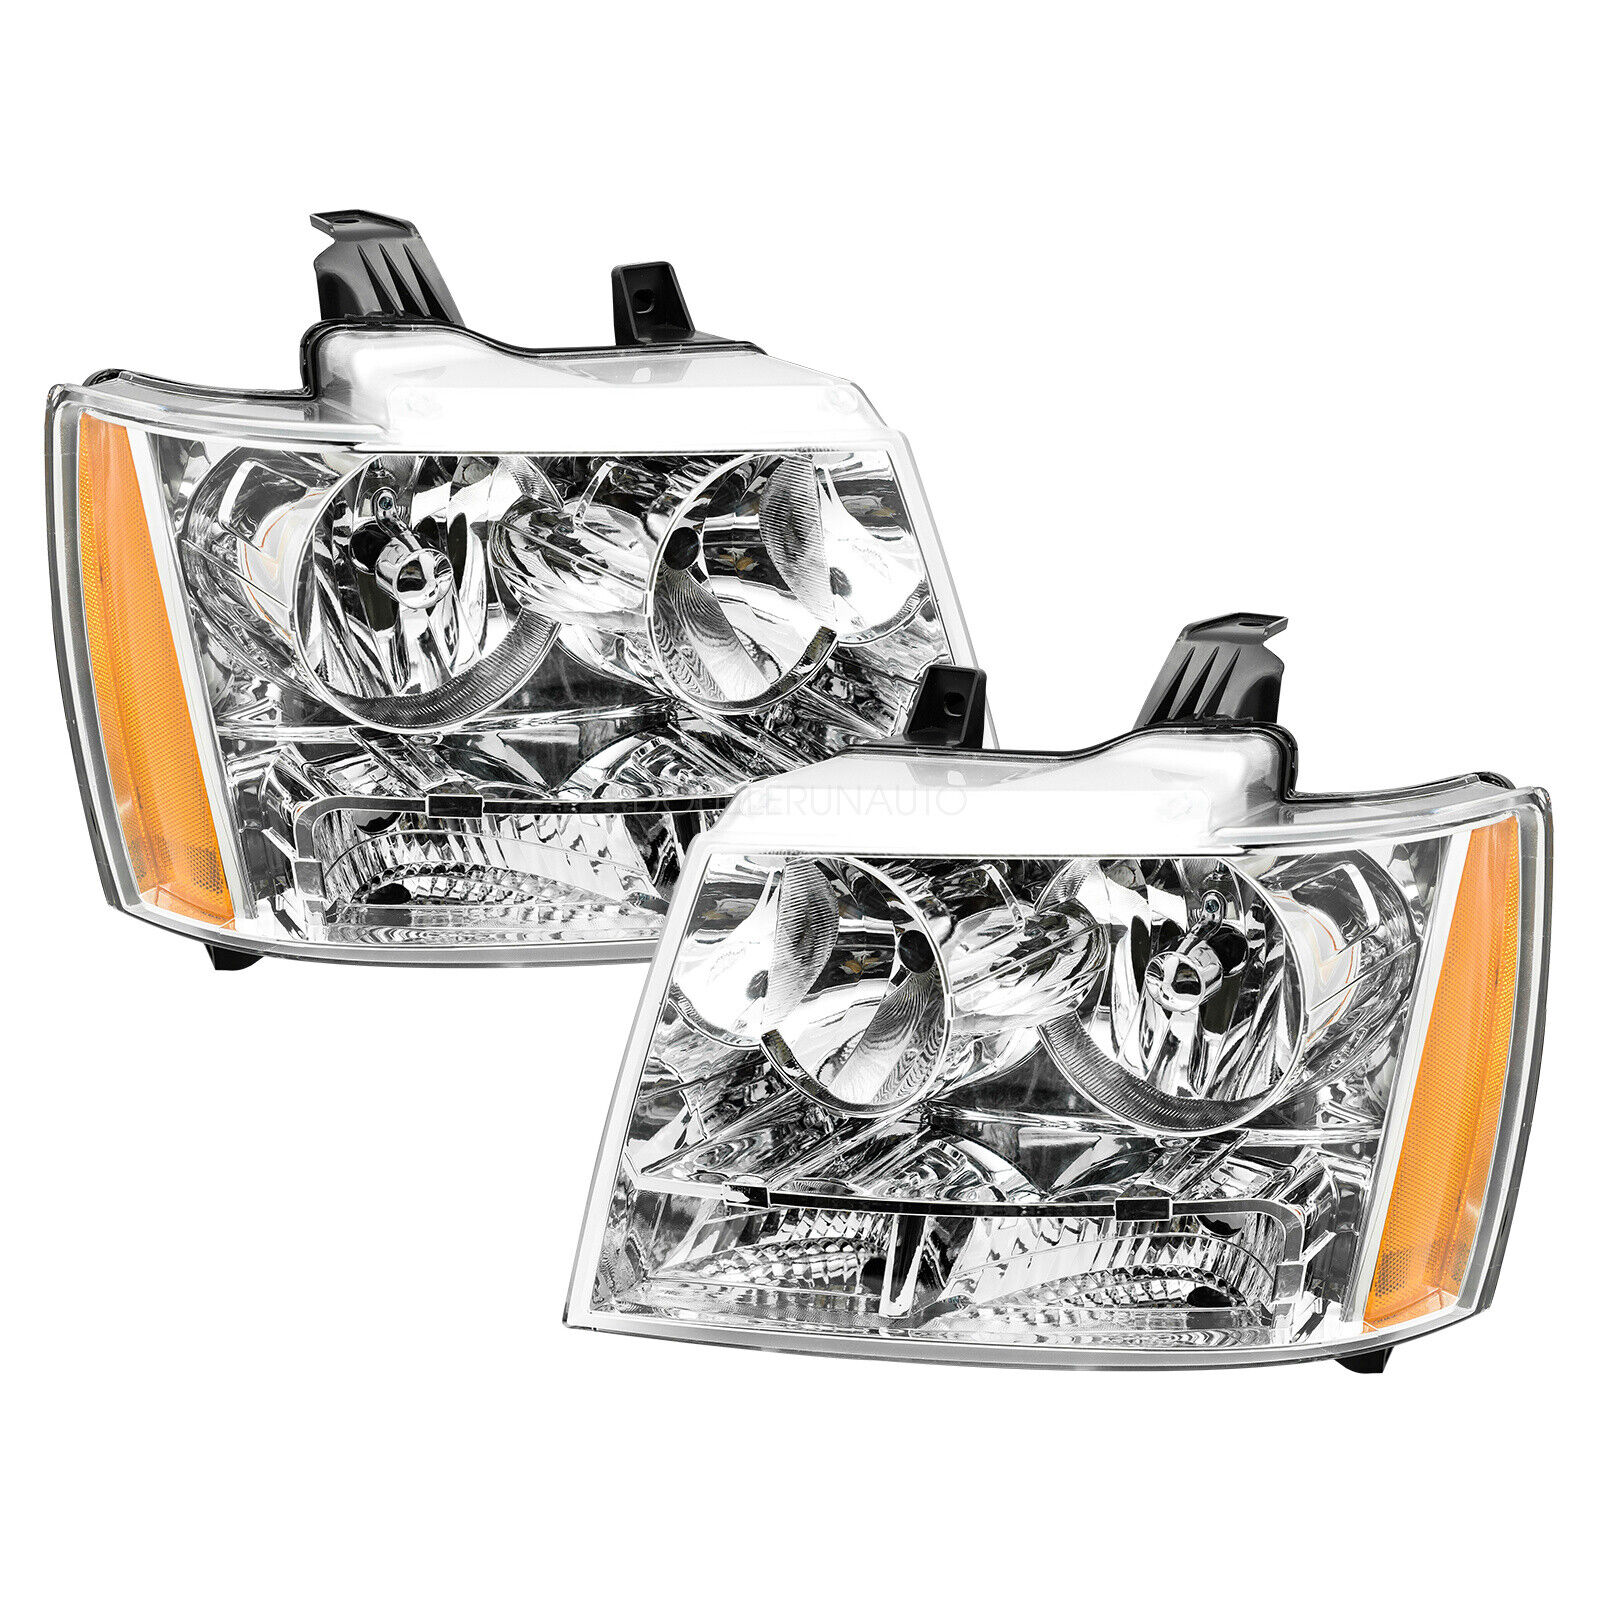 Headlight Lamp Left+Right Fit for 2007-2014 Chevy Avalanche/Suburban/Tahoe